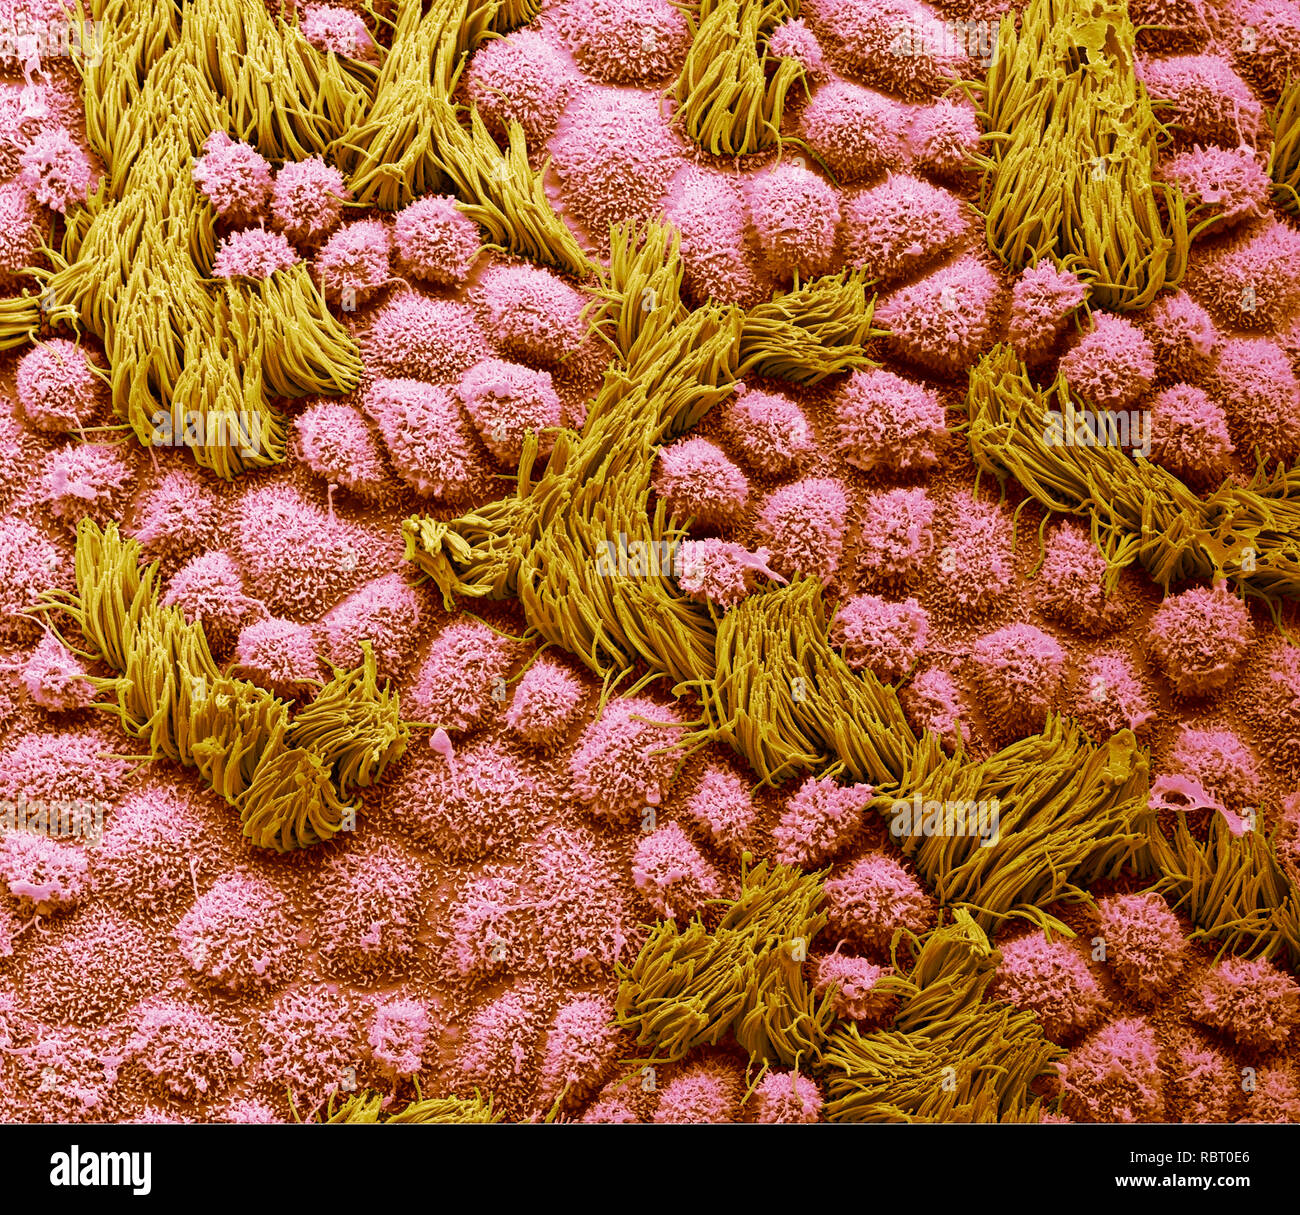 Fallopian tube. Coloured scanning electron micrograph (SEM) of the surface of a human fallopian tube. Fallopian tubes are ducts that lead from the ovaries to the uterus. The epithelium consists of columnar cells, many of which have cilia (yellow). The cilia beat is towards the uterus, aiding transport of the egg from the ovary. Coloured blue are the secretory cells with their microvilli projections. These cells secrete a substance that maintains a moist environment in the tube and may provide nutrients for the egg. Magnification: x2000 when printed at 10 centimetres wide. Stock Photo